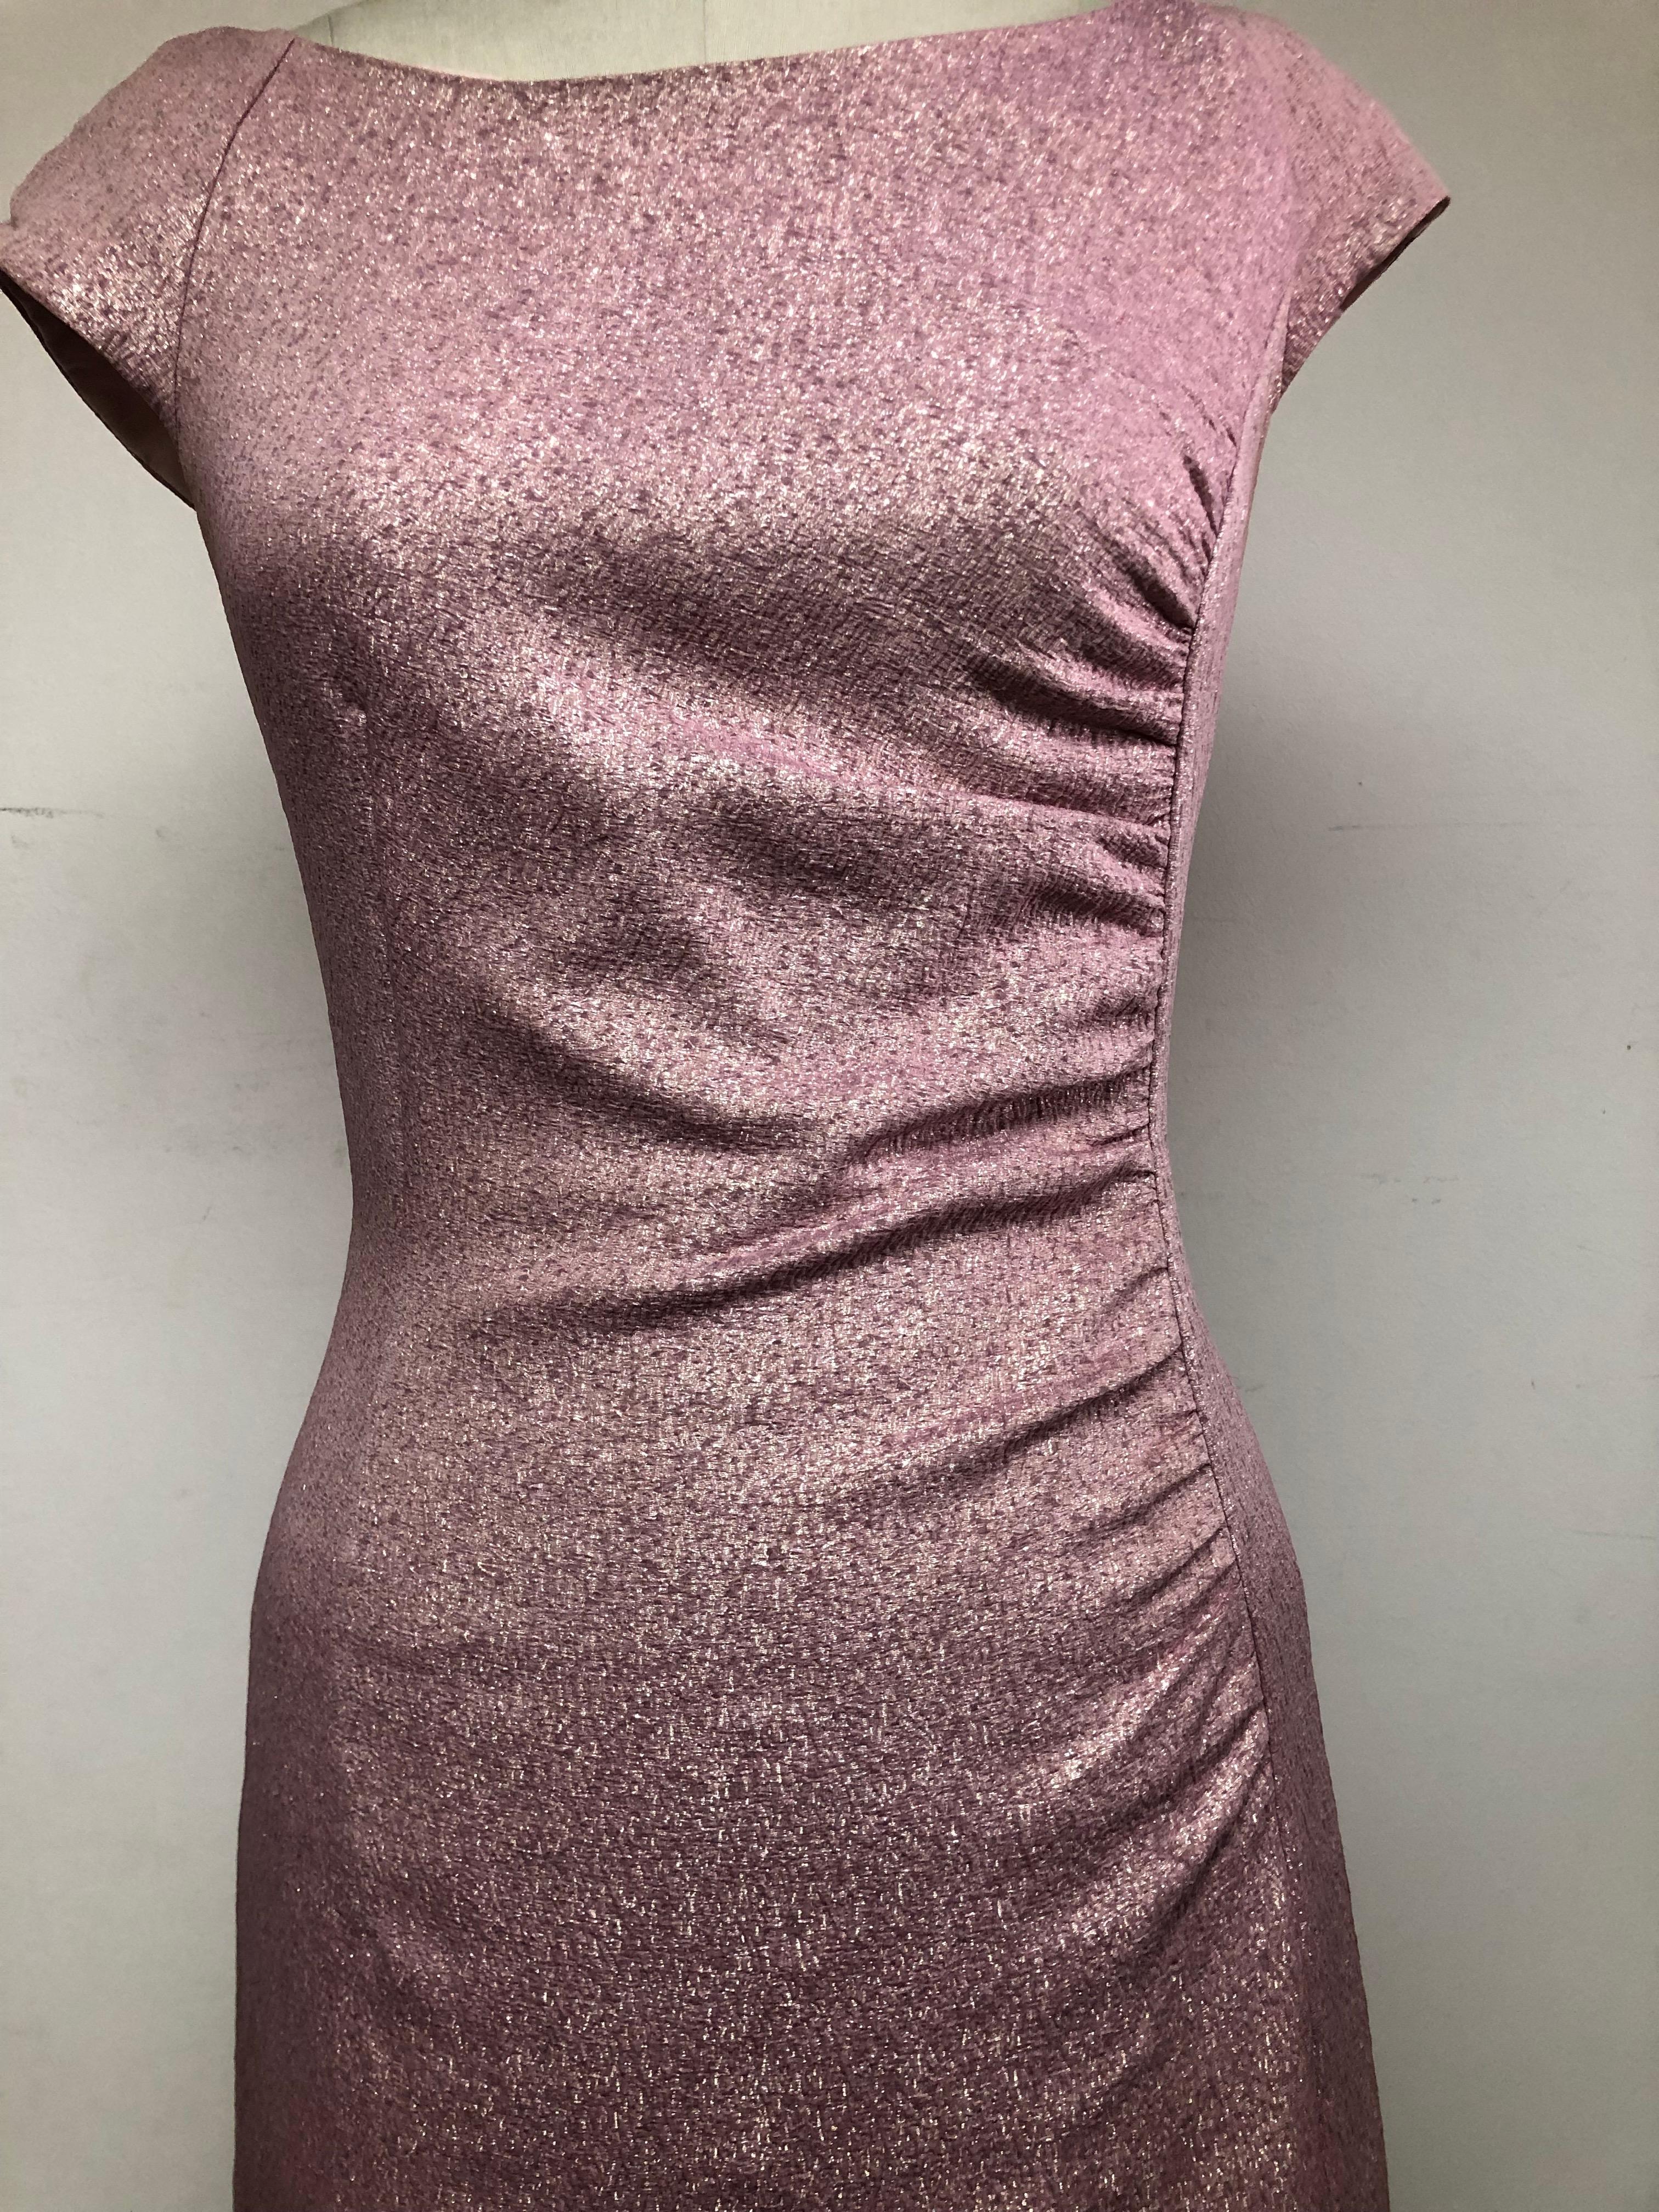 This is loveliest sparkly pink French crepe gown.  The gown is 
very flattering and figure hugging with side ruching and a  slit for showing some leg. The perfect packable gown. The textile is from the illustrious  French mill Sfate and Combier.